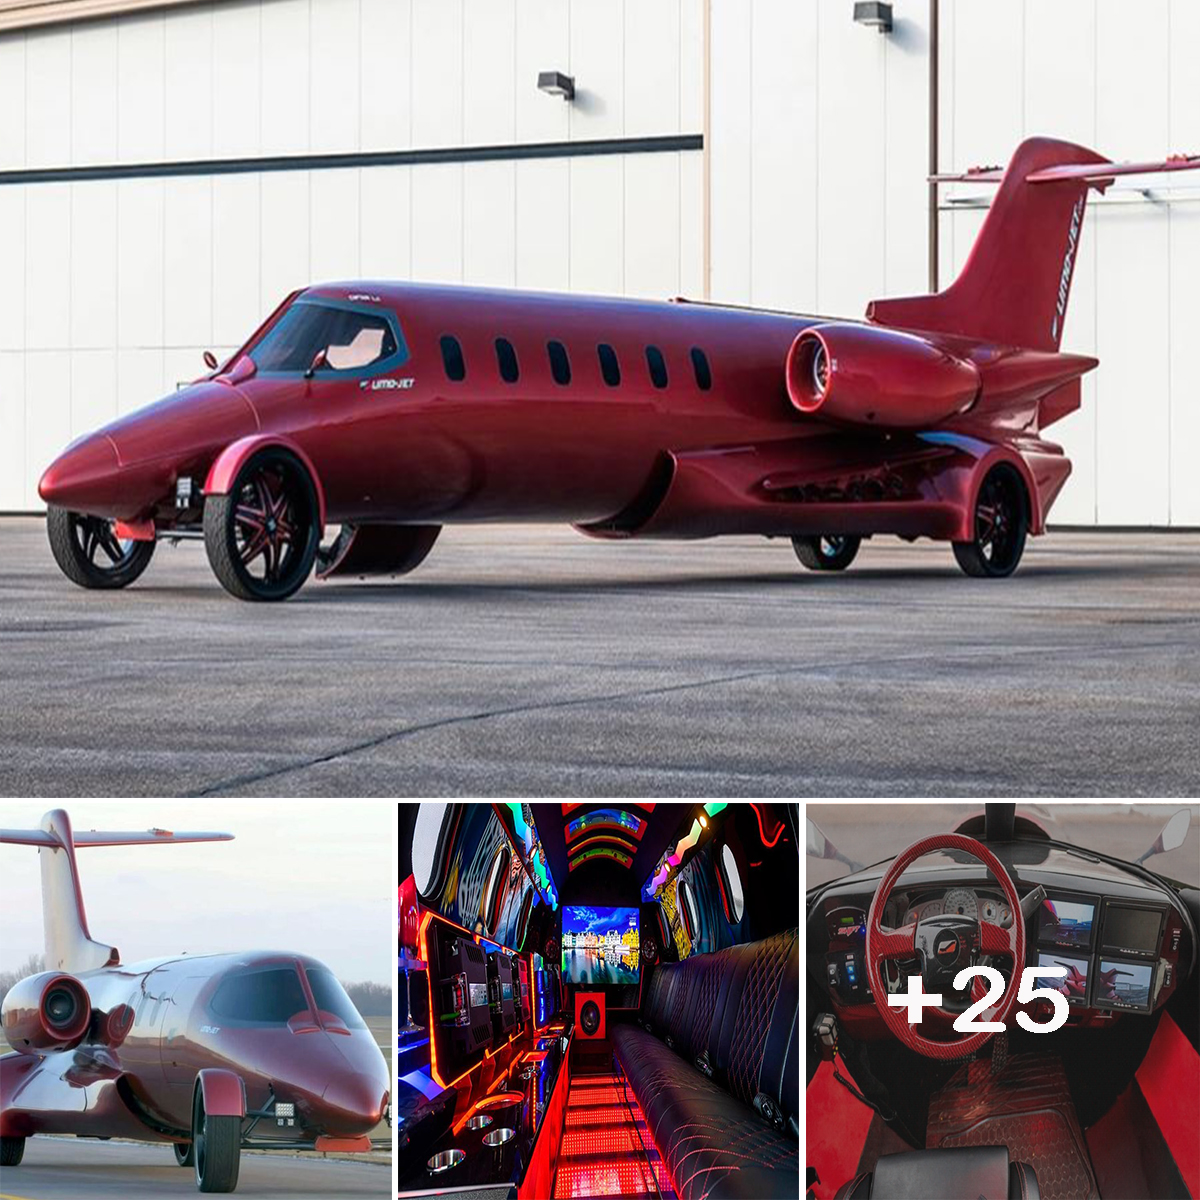 Today in Ridiculous Cars: A Learjet Converted Into a Street-Legal Limousine